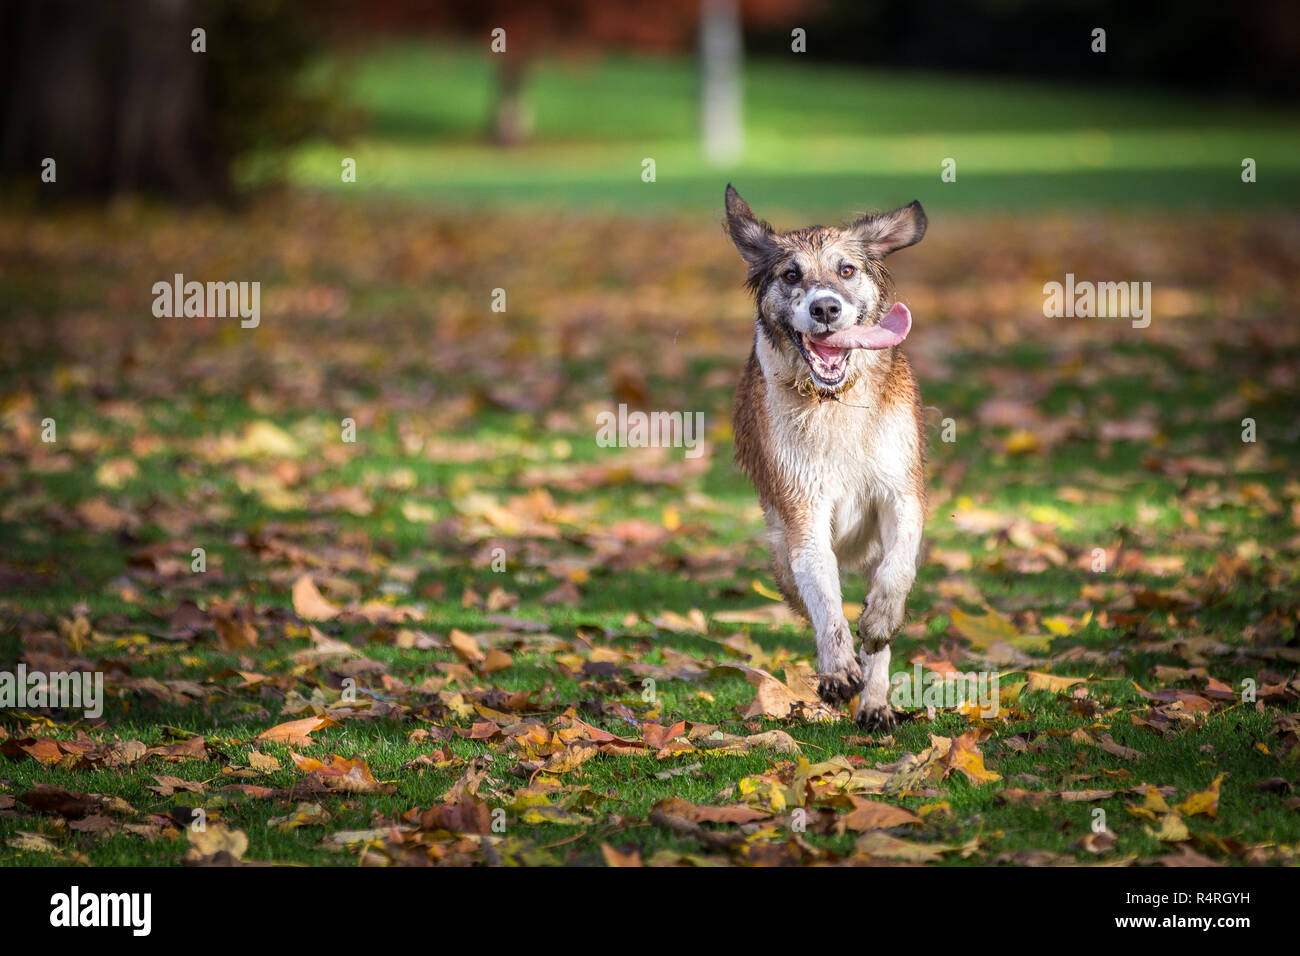 Dog playing in Water/ Autumn Leaves Stock Photo